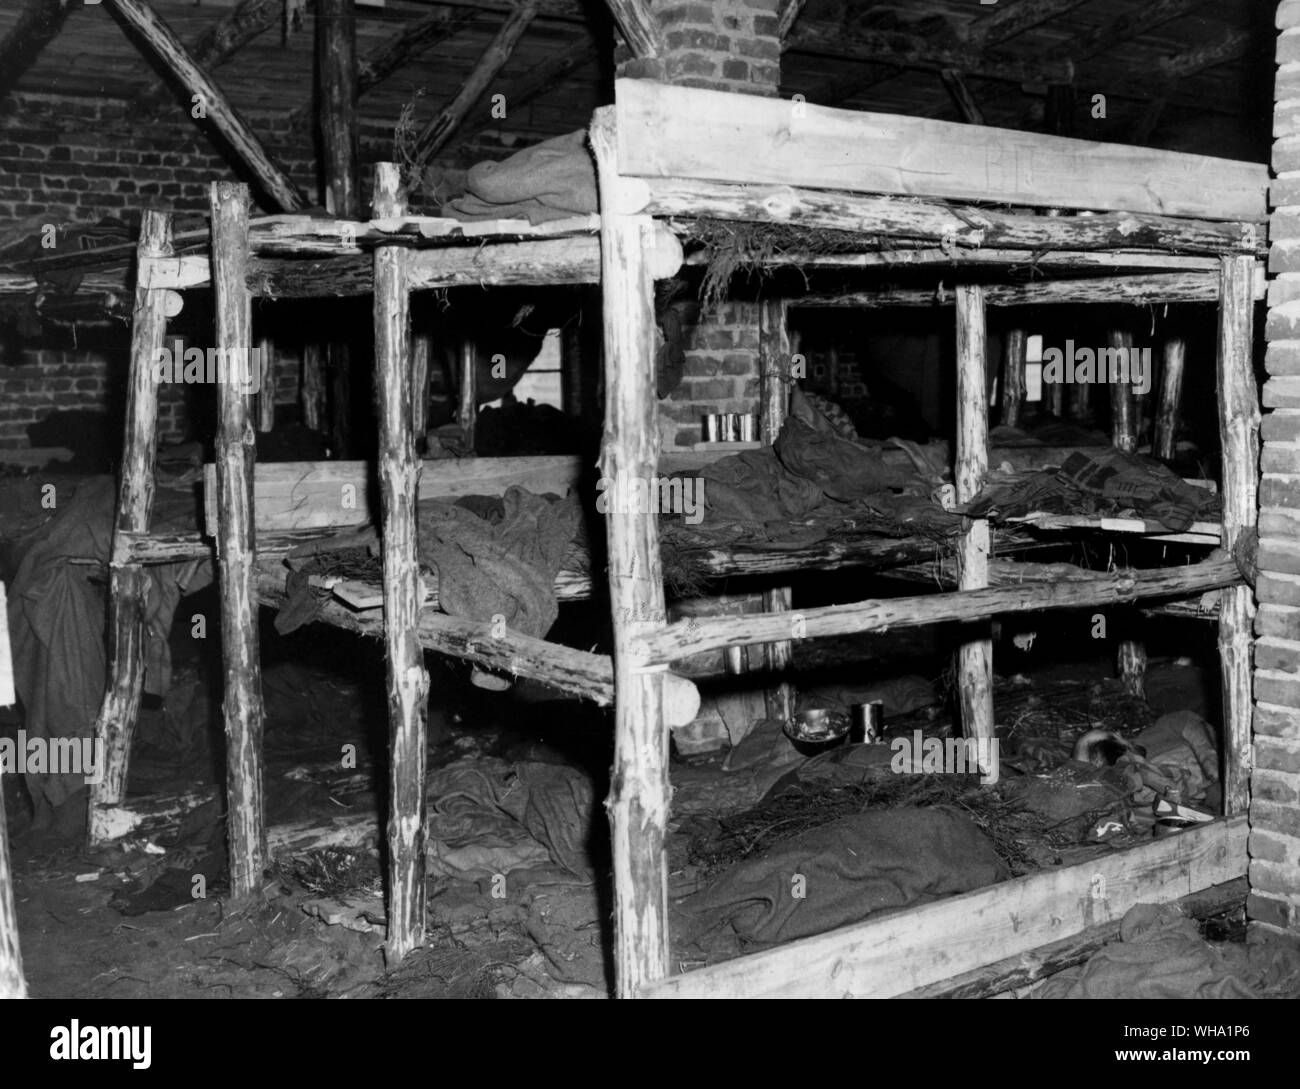 WW2: Here are the sleeping quarters in the Nazi prison camp at Wobbelin, Germany. Liberated by men of the 8th Infantry Division, US 9th Army. The camp held over 4000 prisoners, 150 of whom were reported to have died each day. Stock Photo